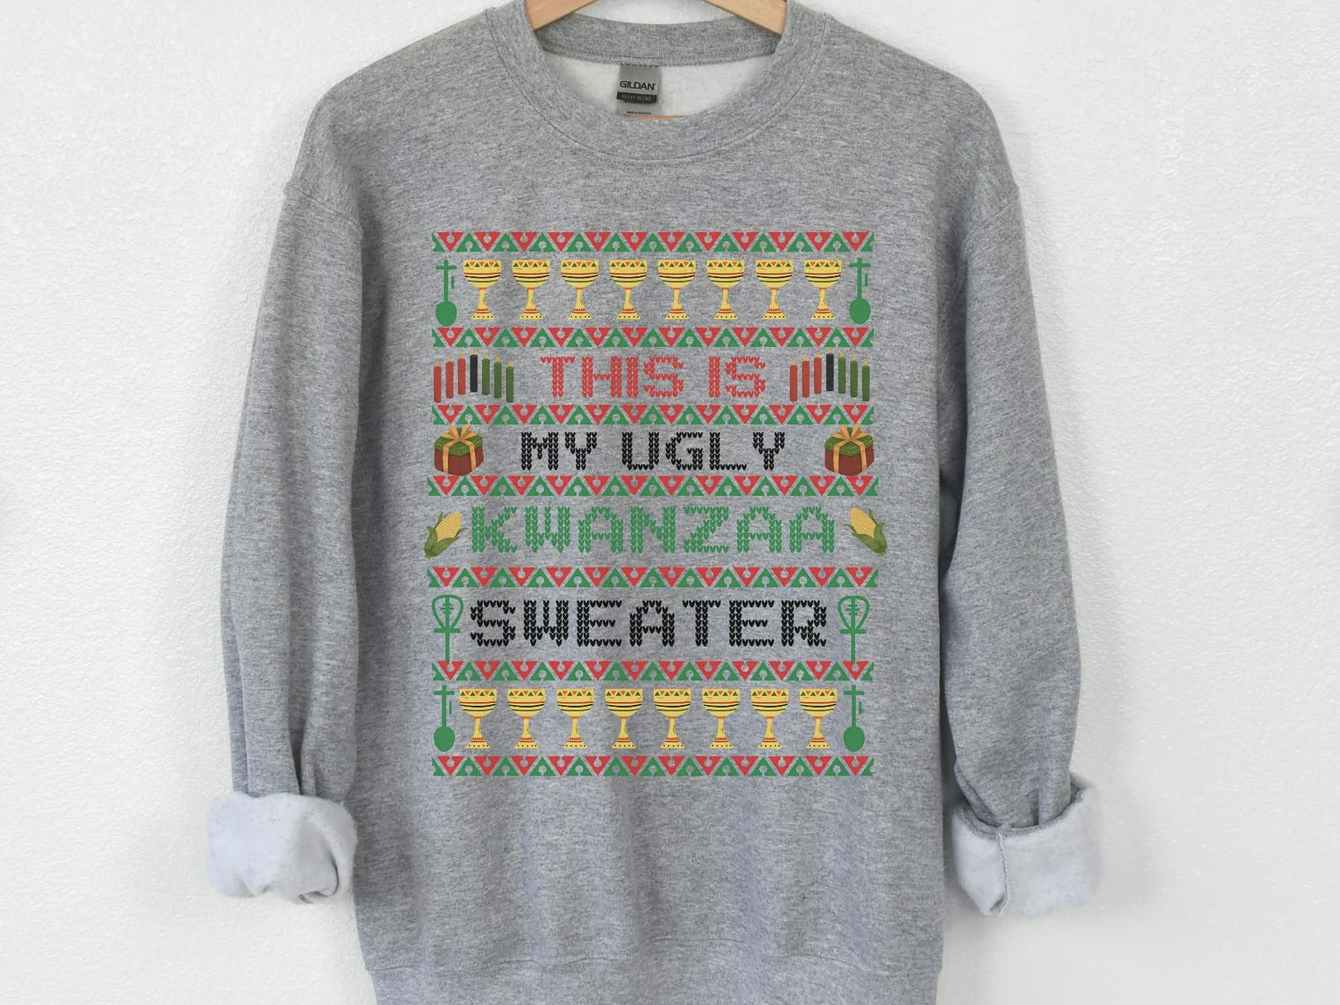 Grey sweater that reads, "this is my ugly Kwanzaa sweater